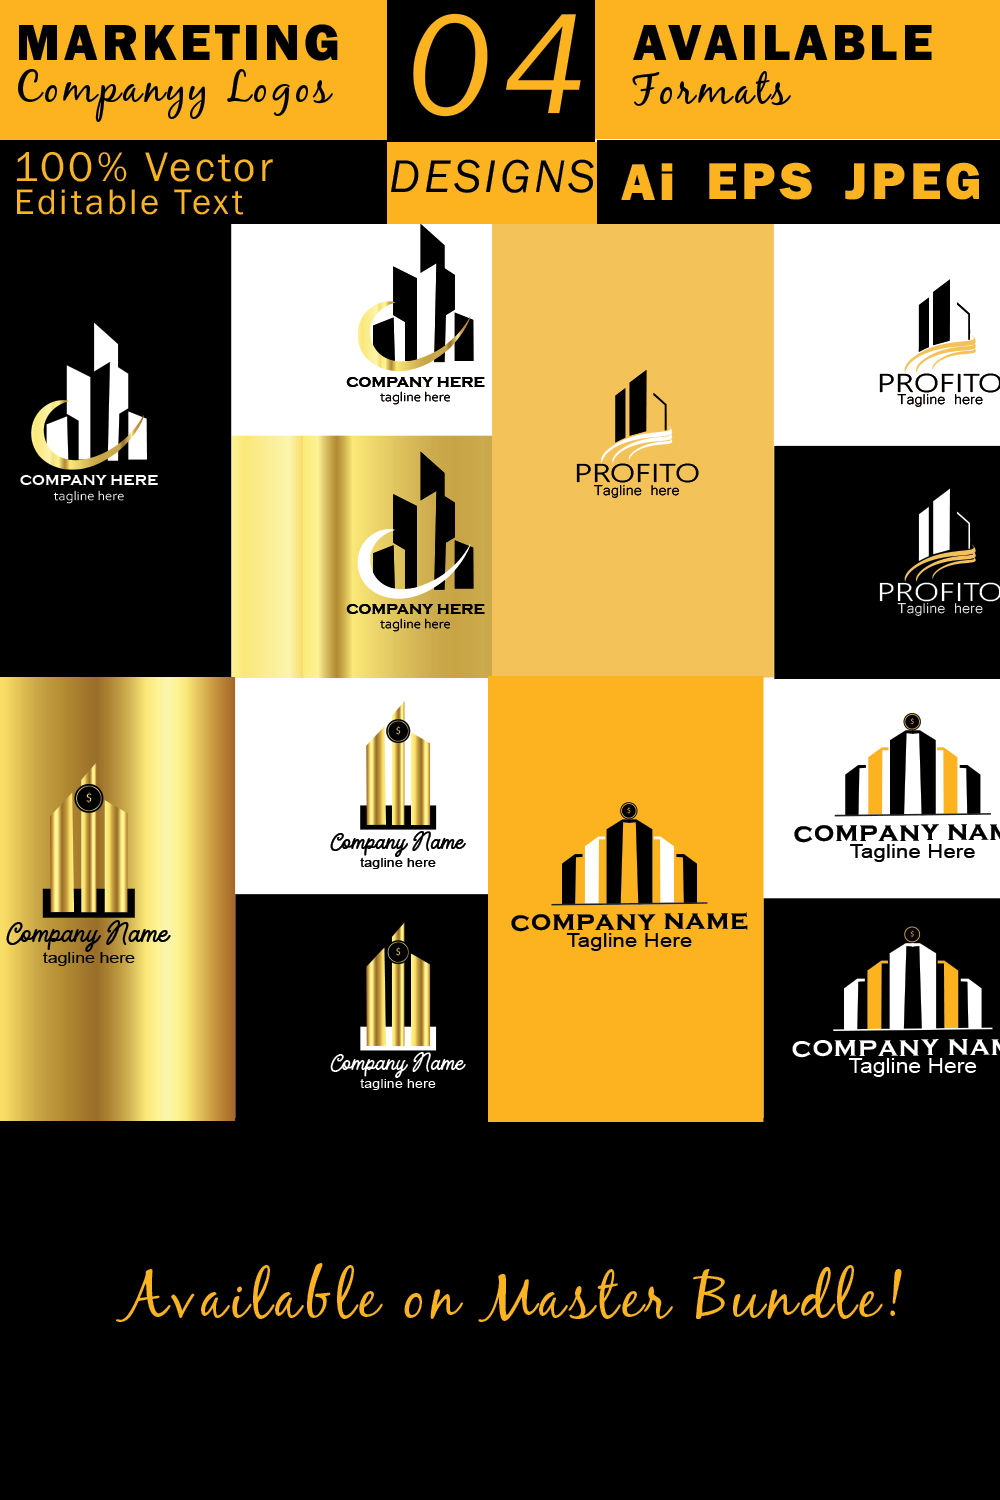 Marketing Company Logos for your Business or Brand pinterest preview image.